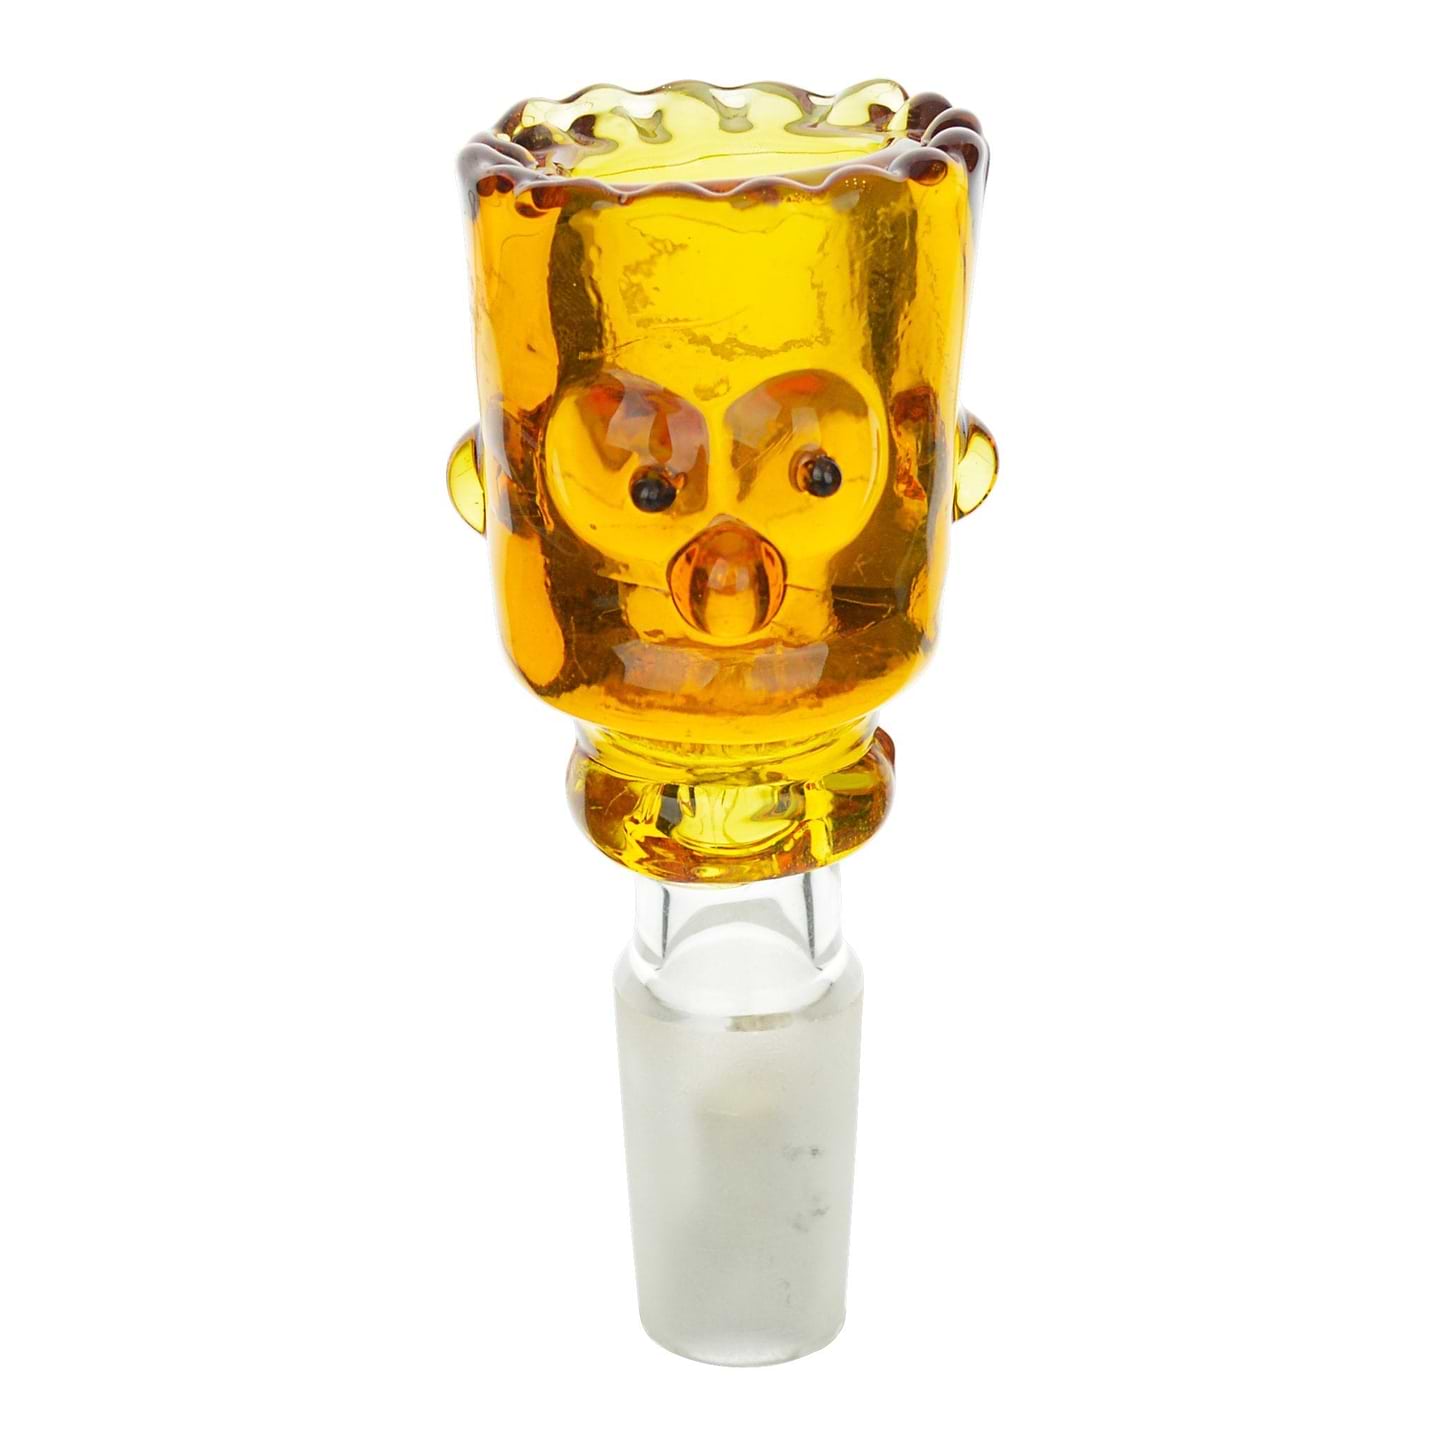 Yellow 14mm male glass bowl Simpsons inspired smoking accessory with sculpted face of Bart Simpson hair rigged surface